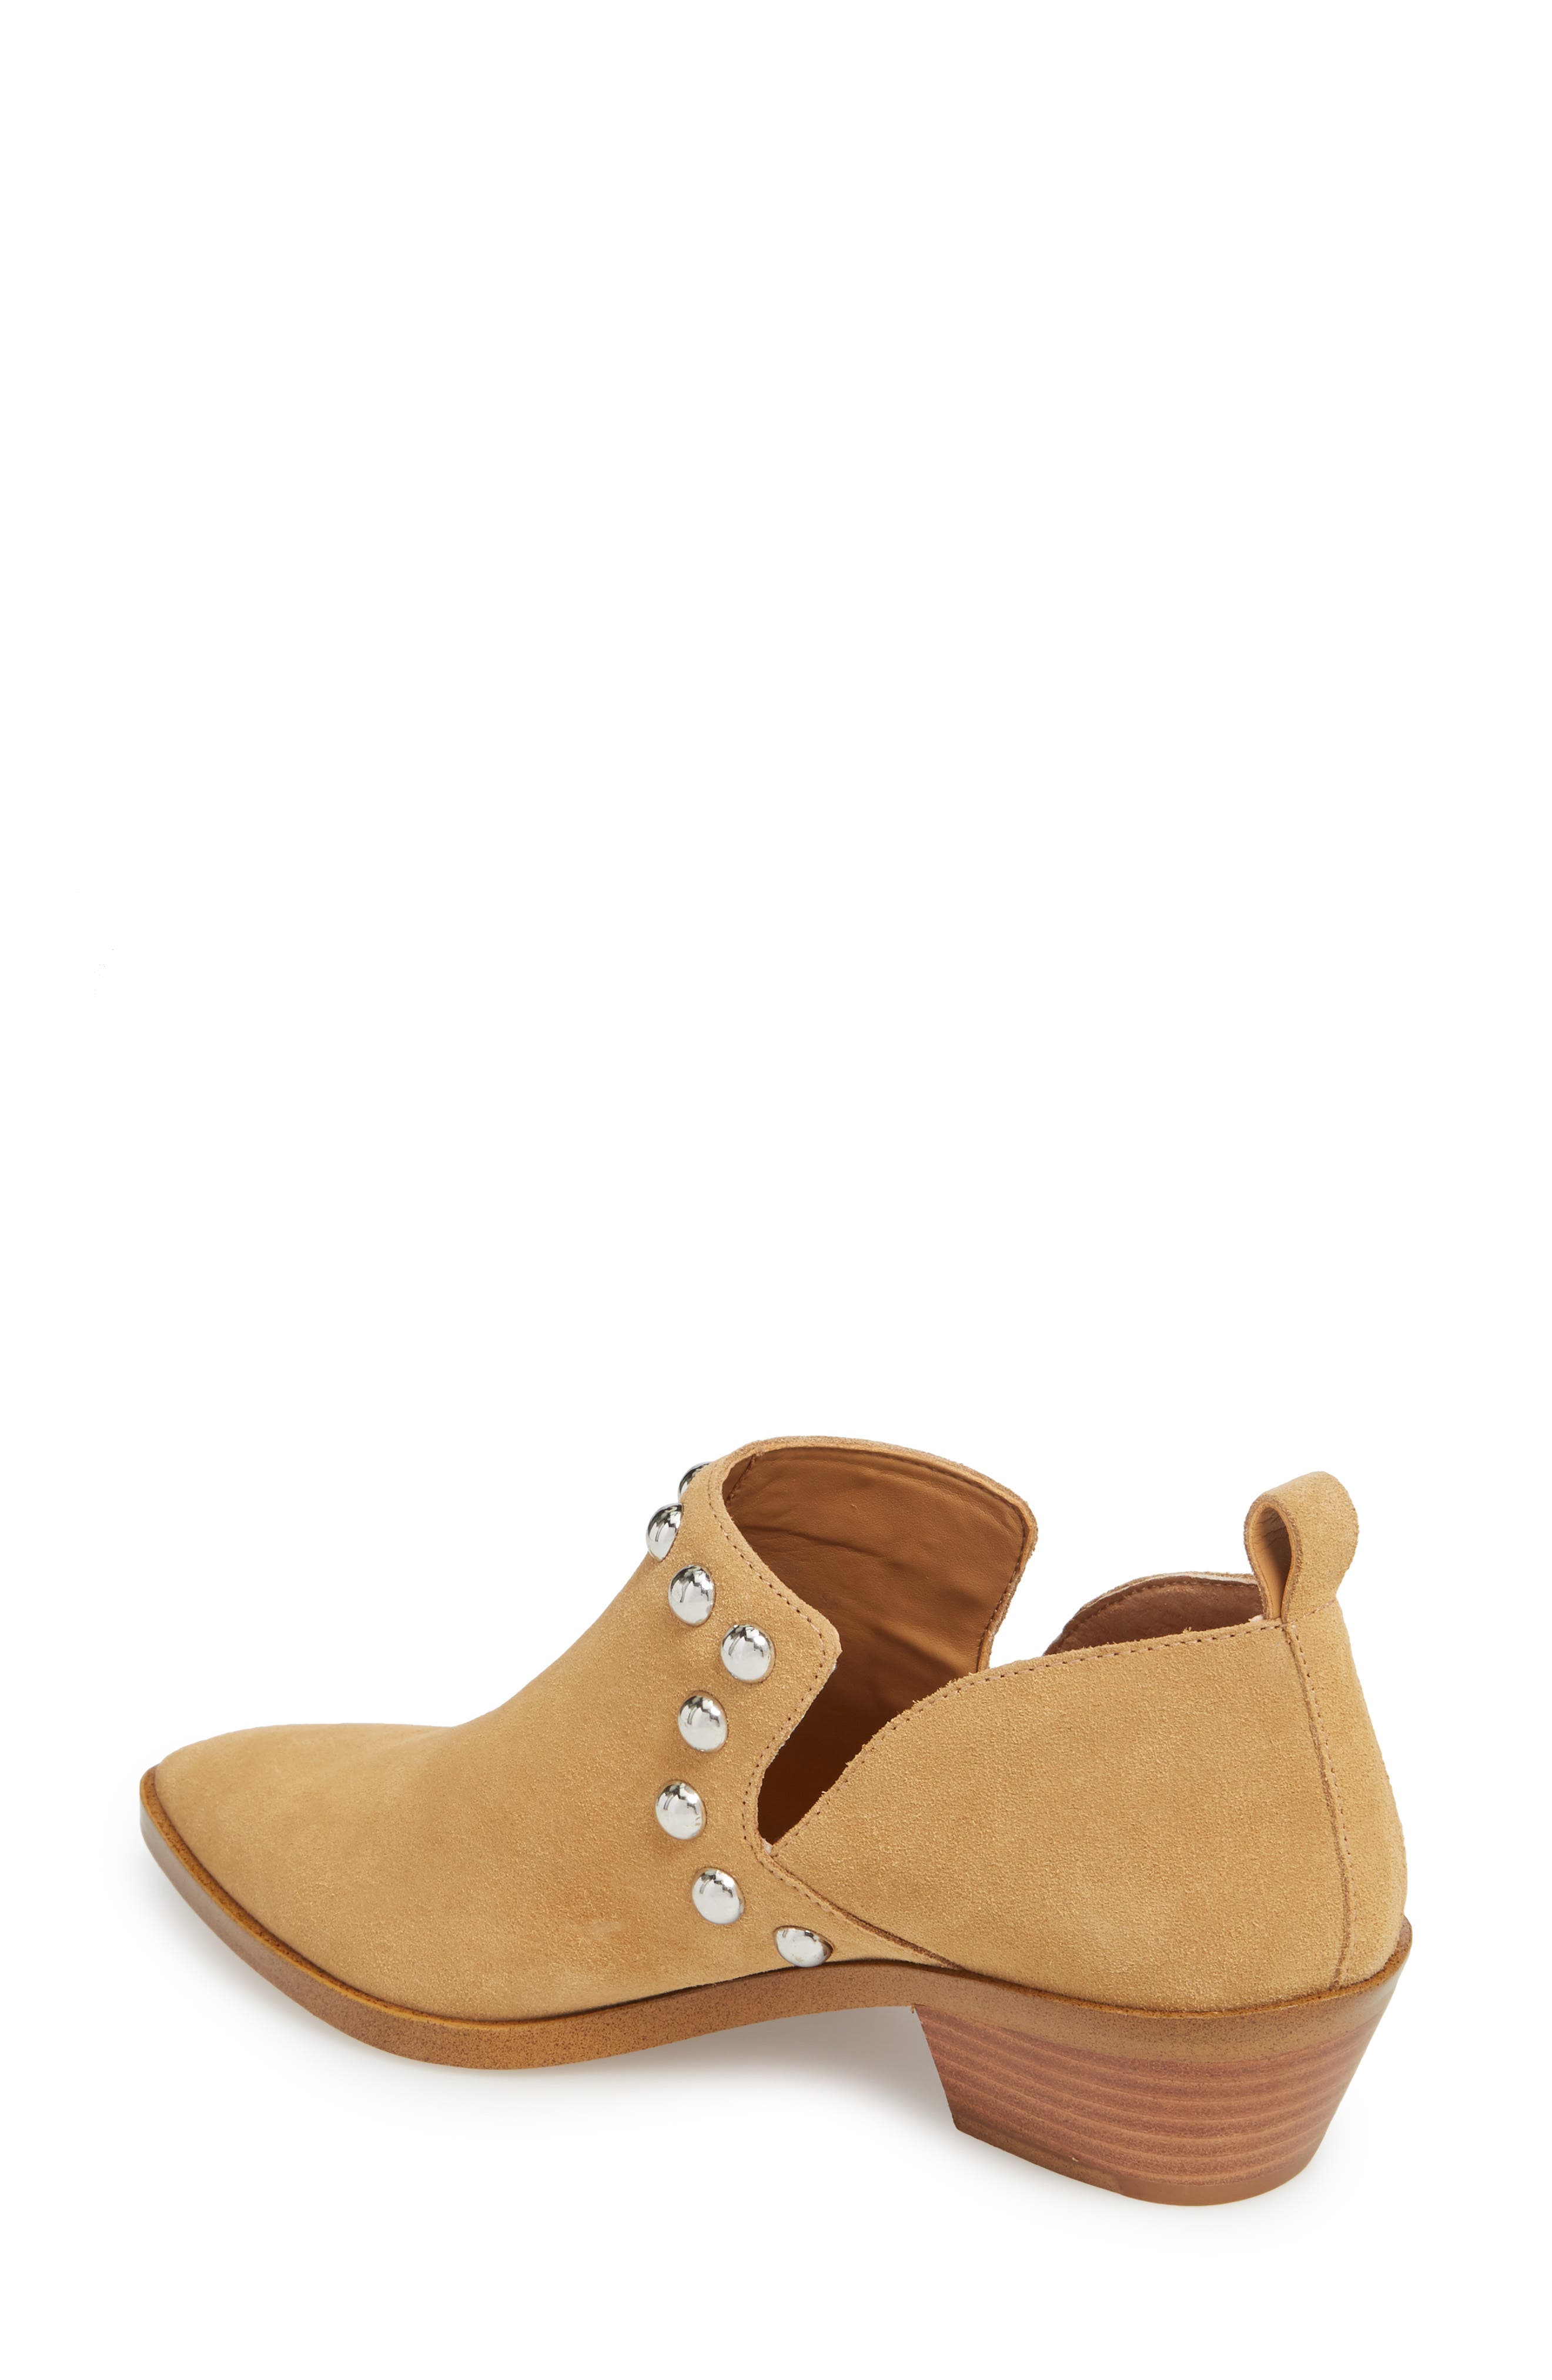 rebecca minkoff katen studded leather booties